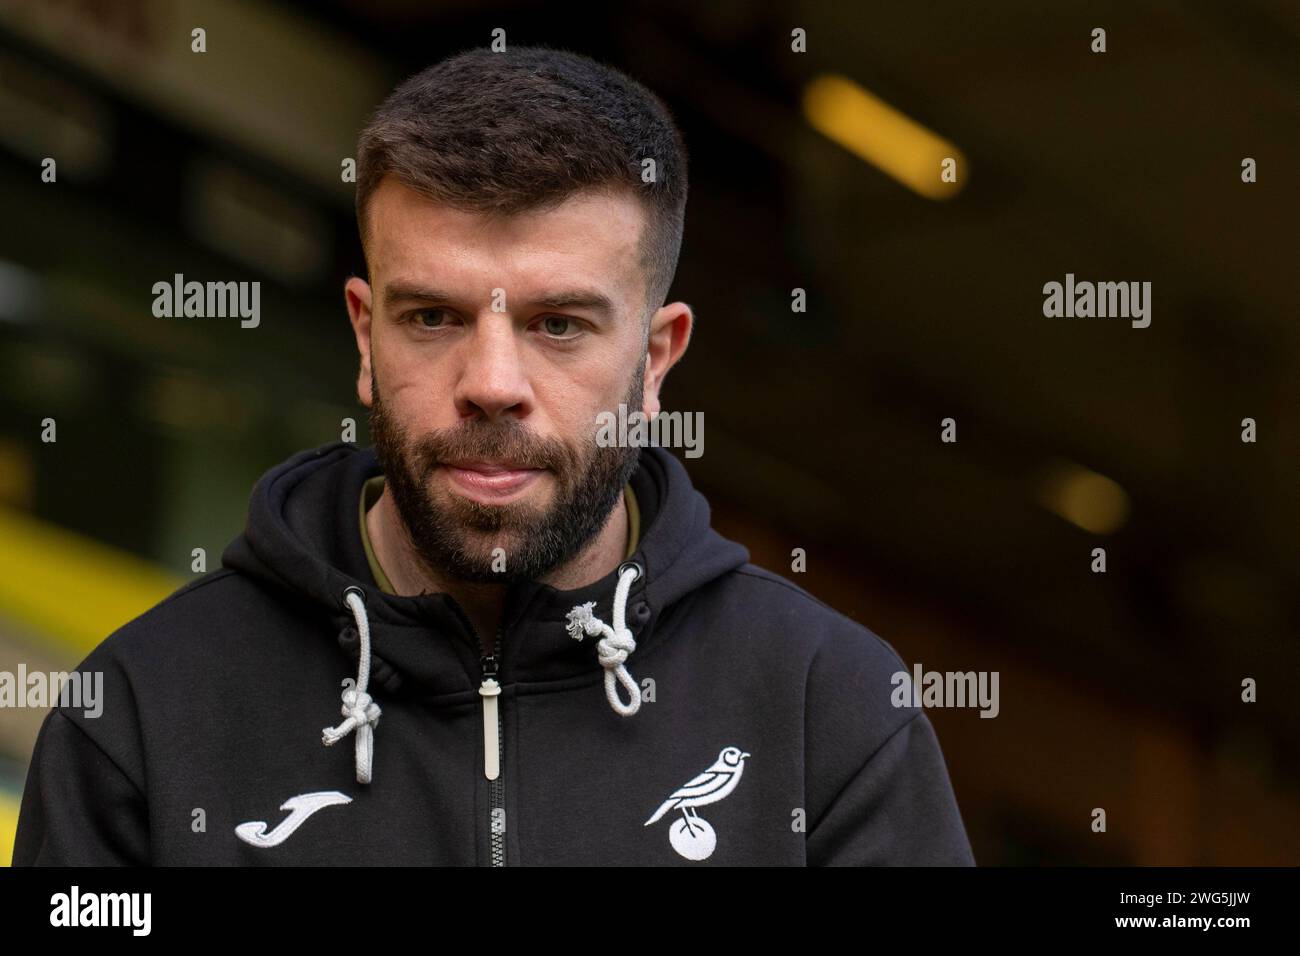 Norwich on Saturday 3rd February 2024. Norwich City Grant Hanley is seen before the Sky Bet Championship match between Norwich City and Coventry City at Carrow Road, Norwich on Saturday 3rd February 2024. (Photo: David Watts | MI News) Credit: MI News & Sport /Alamy Live News Stock Photo